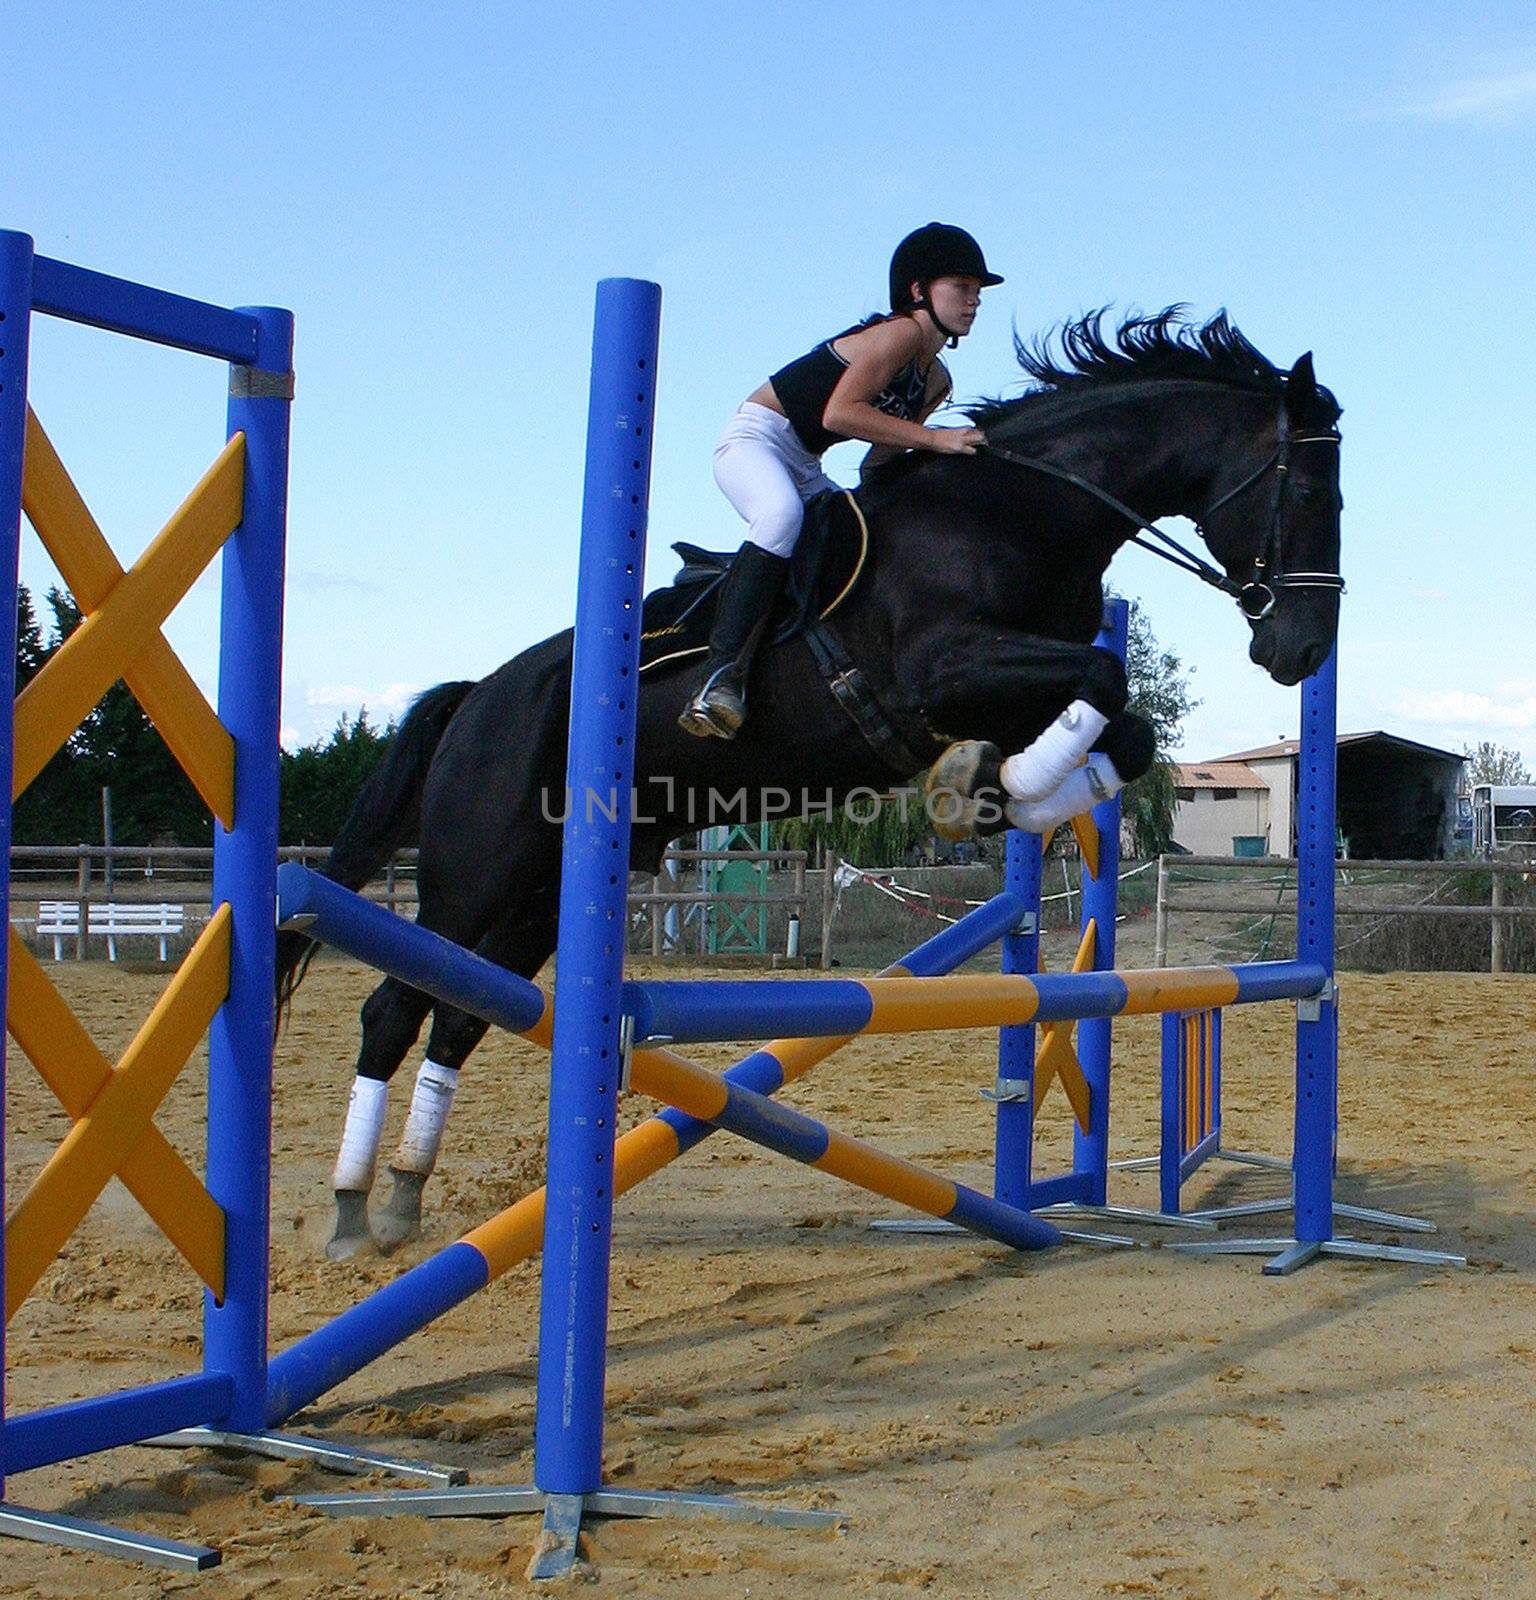 training for competition of jumping for an horse and her riding girl